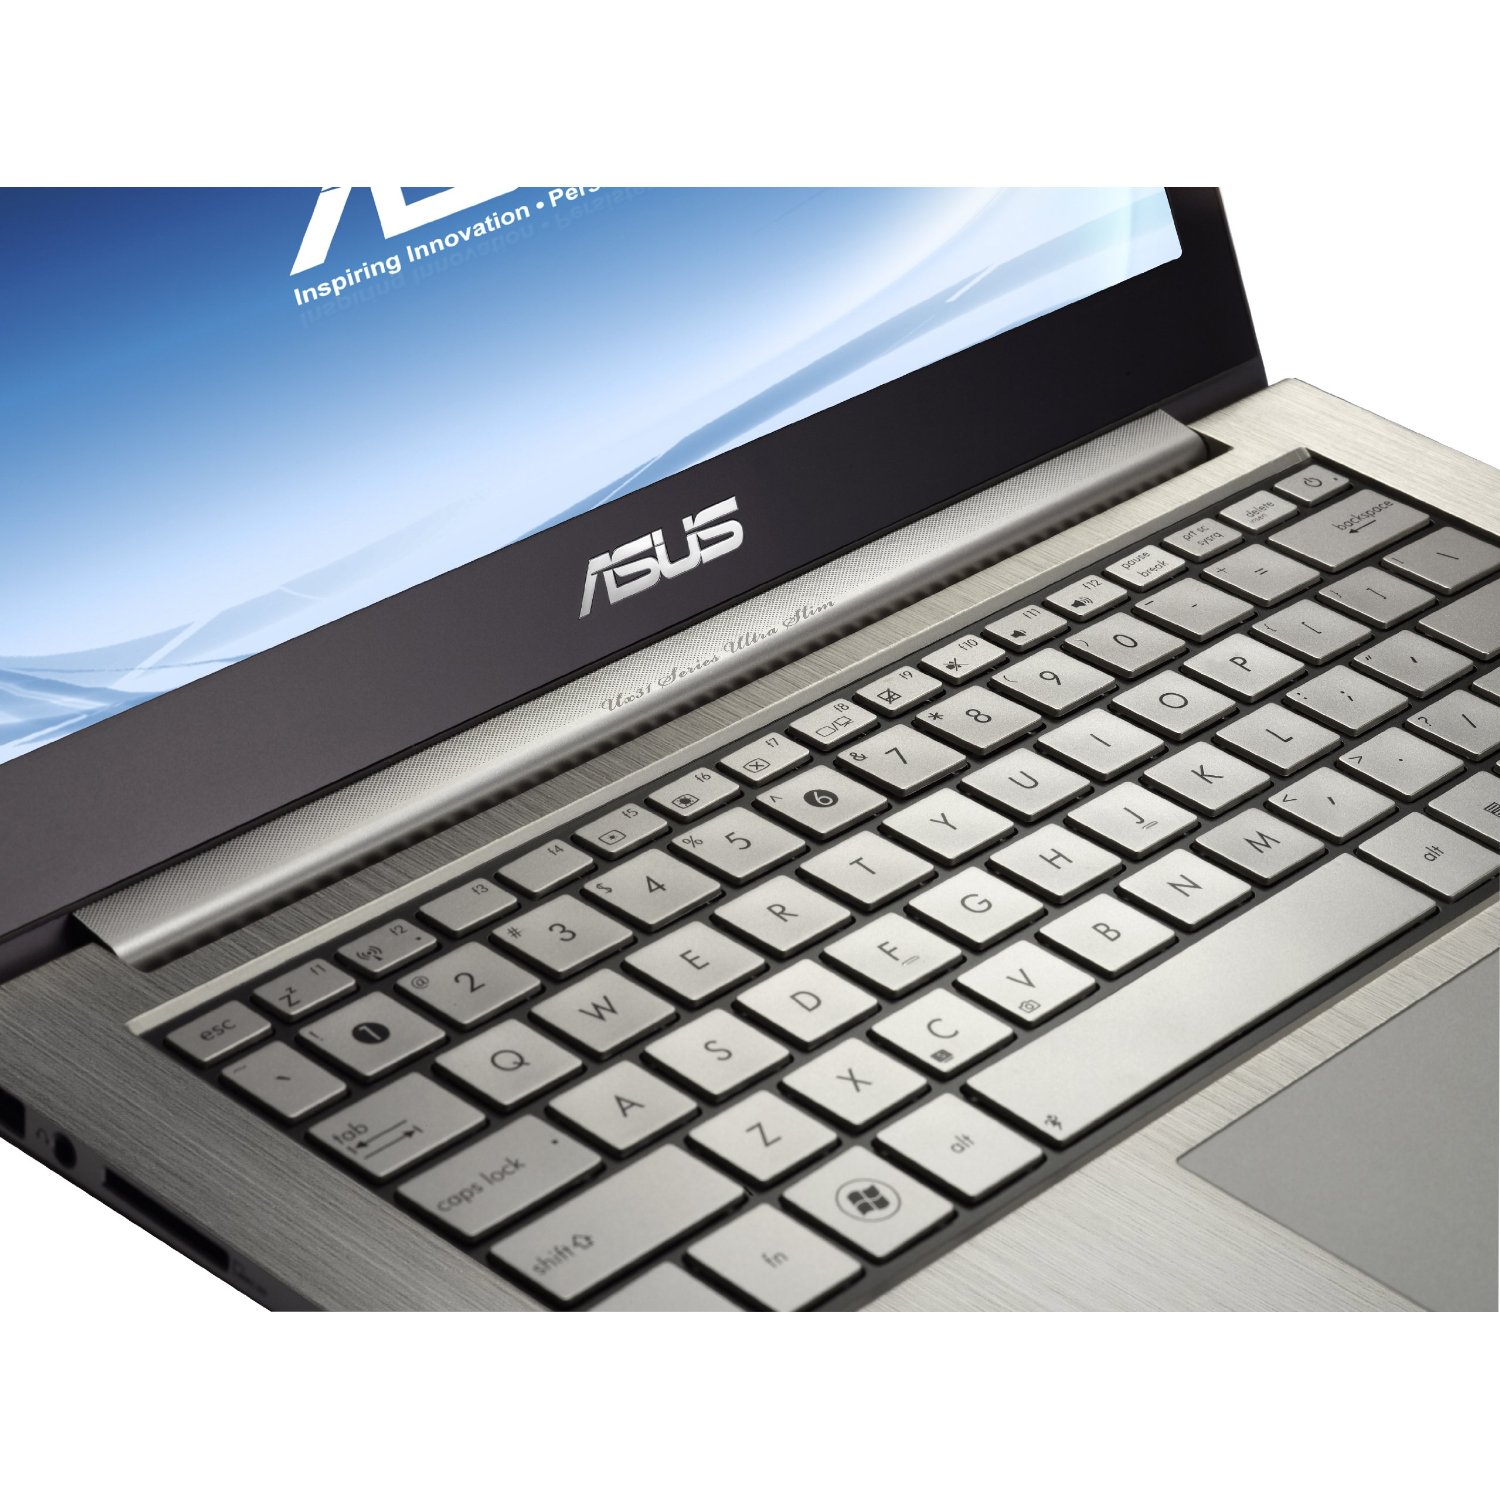 http://thetechjournal.com/wp-content/uploads/images/1111/1322100736-asus-zenbook-ux31edh72-133inch-thin-and-light-ultrabook-7.jpg